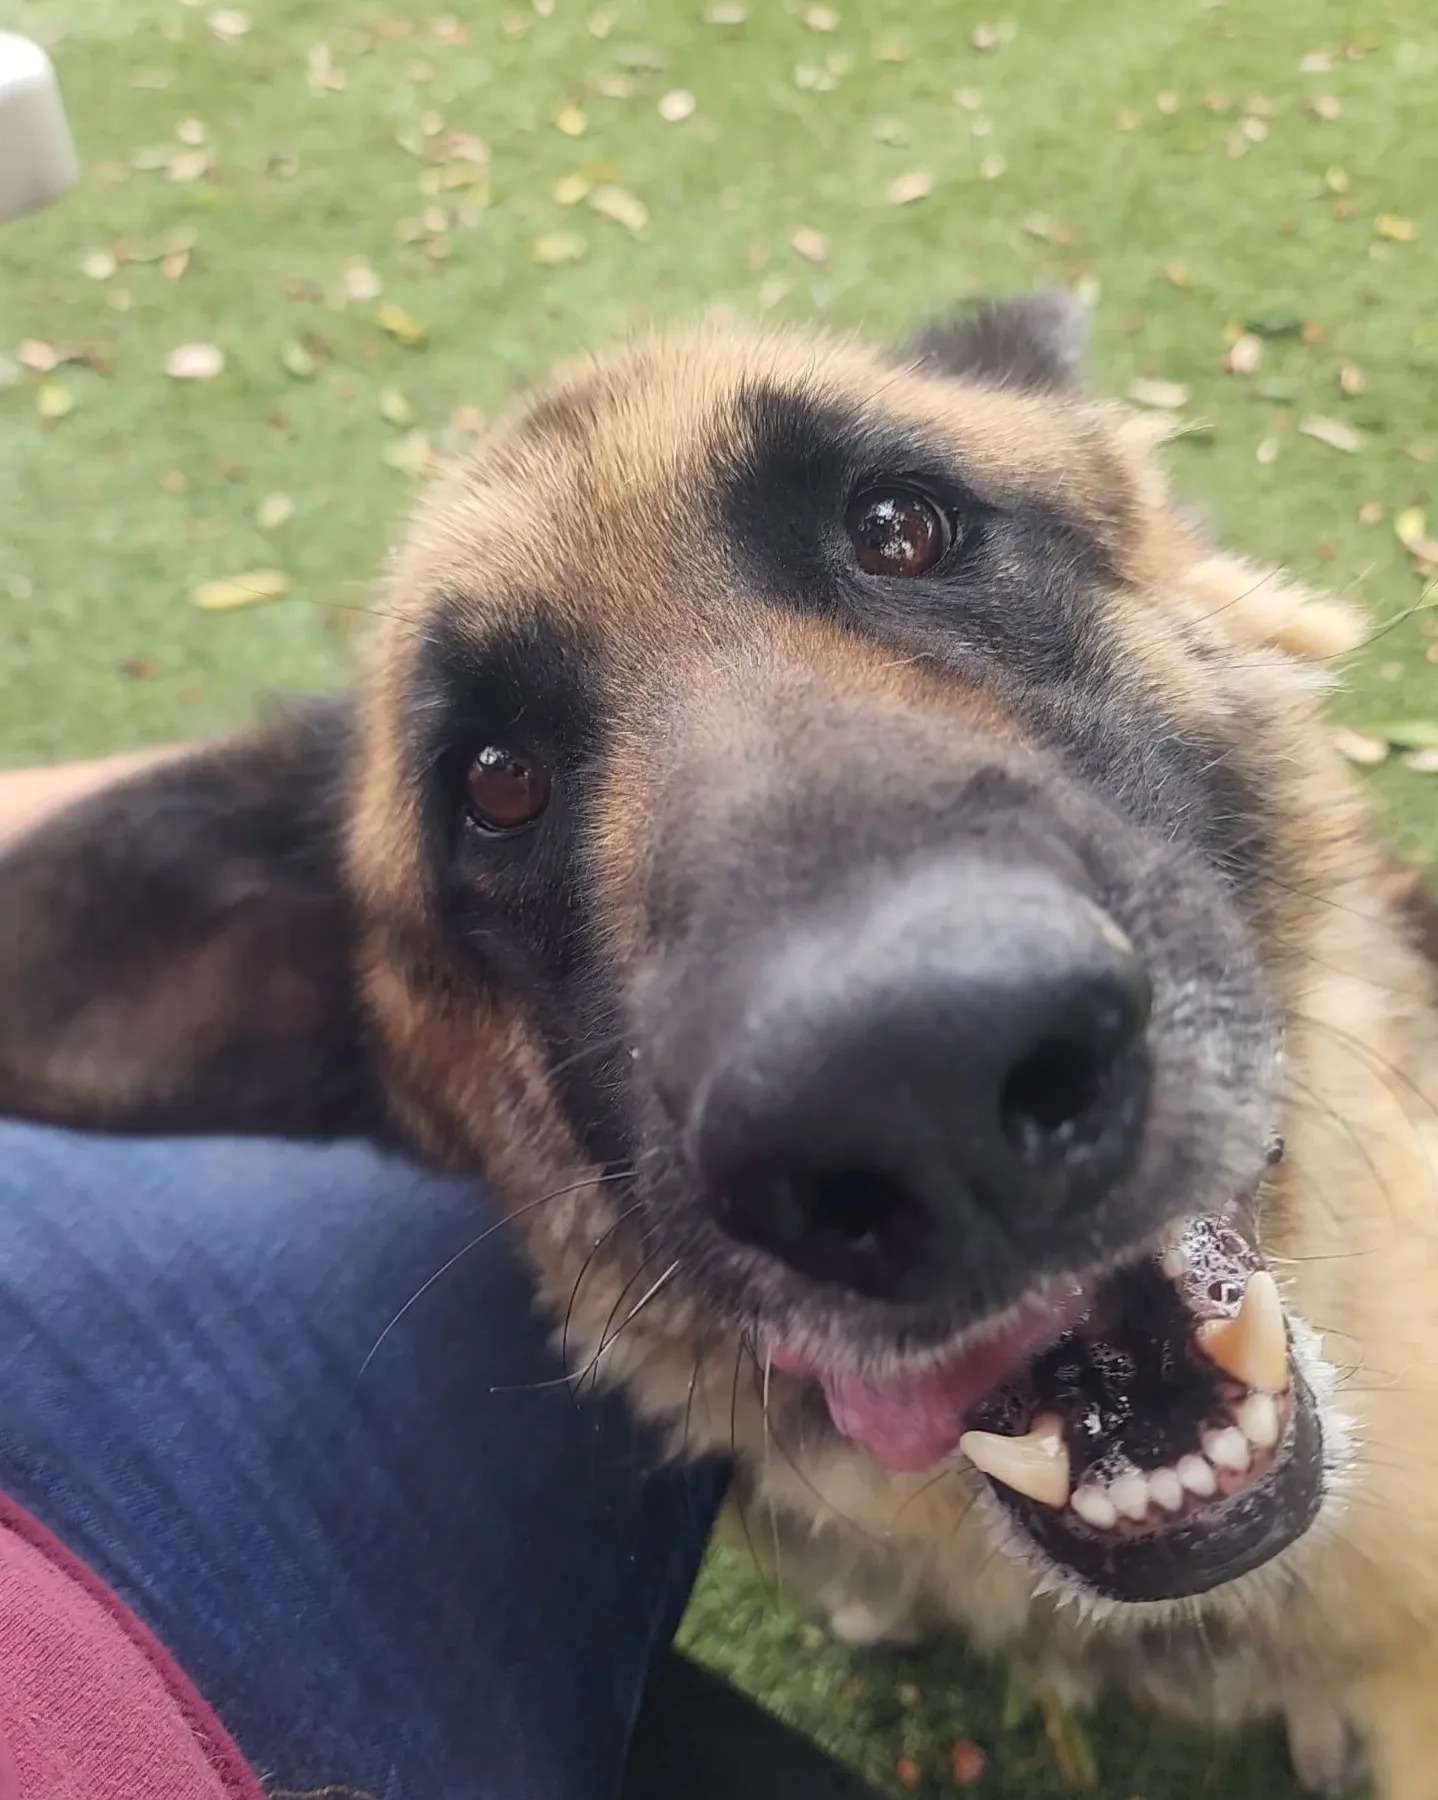 Handsome shepherd wants to be someone's friend